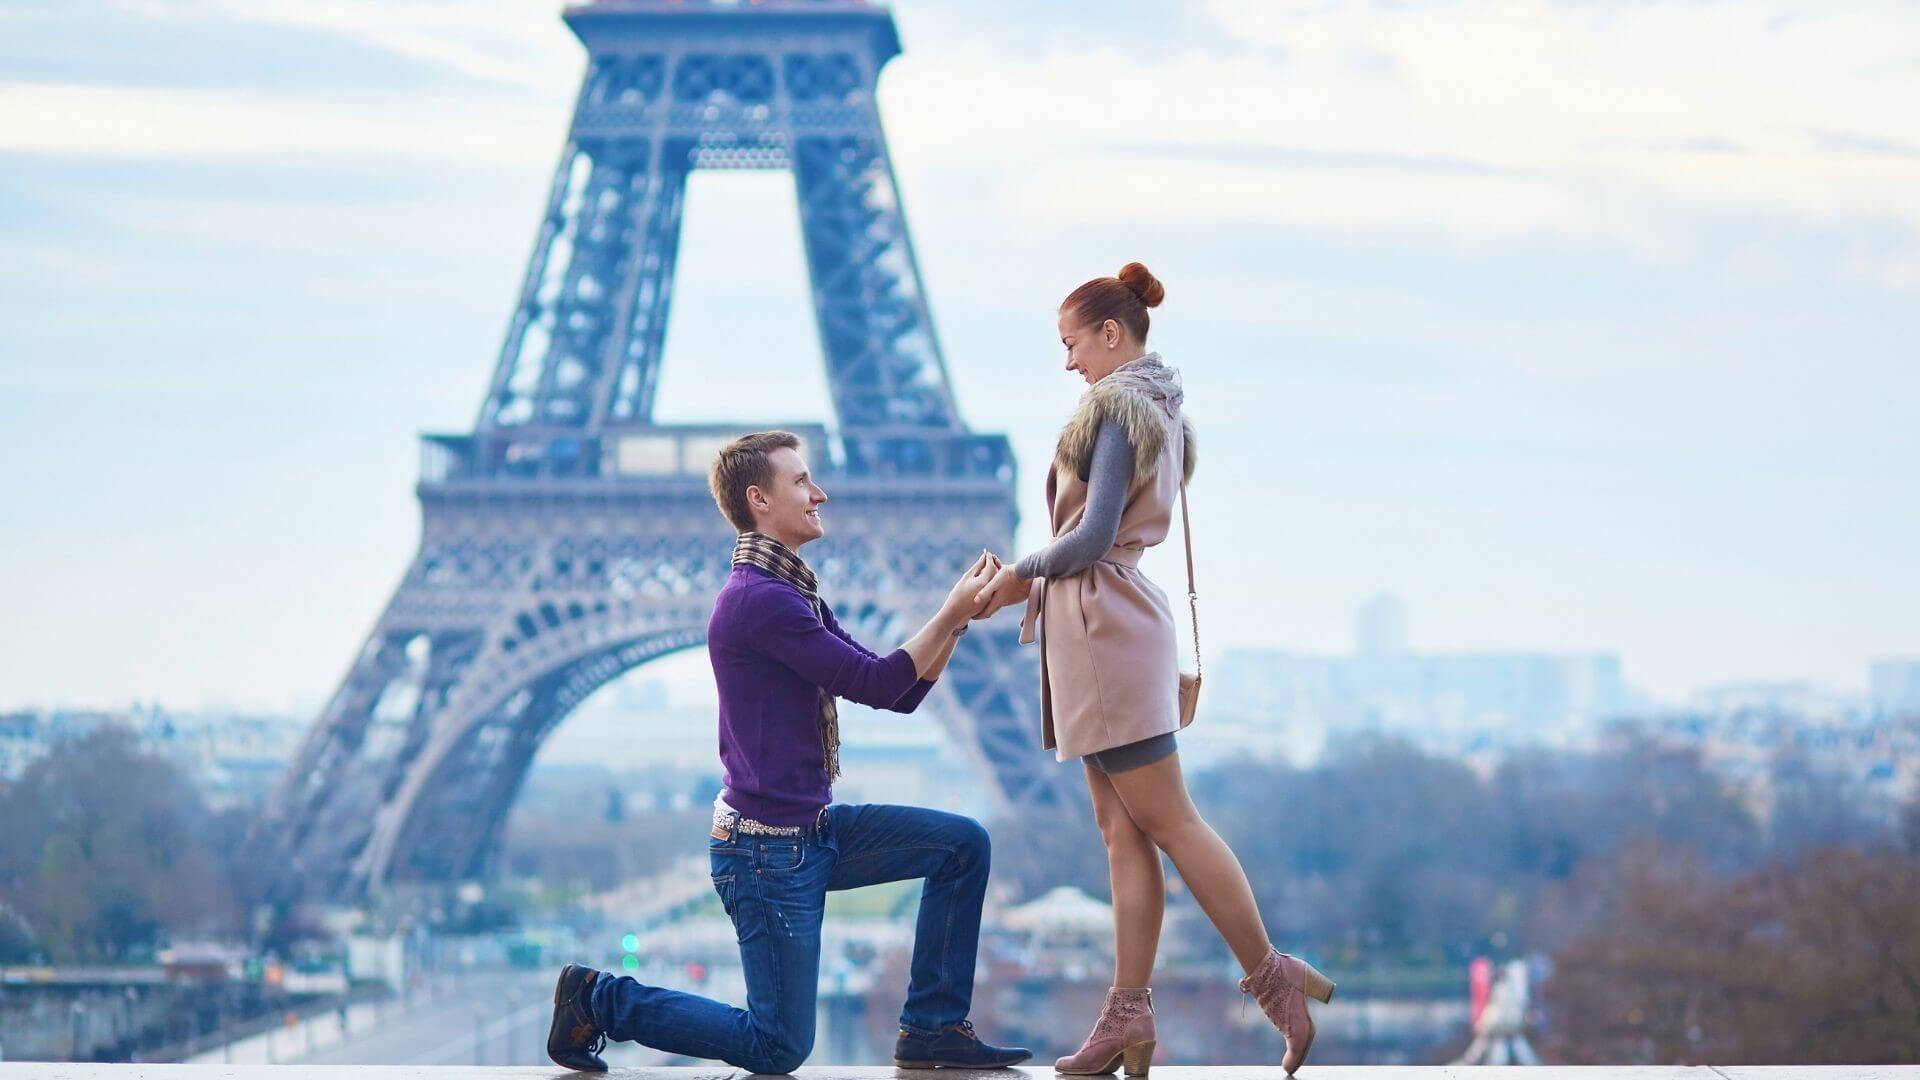 Comments for engagement photos loved by couples